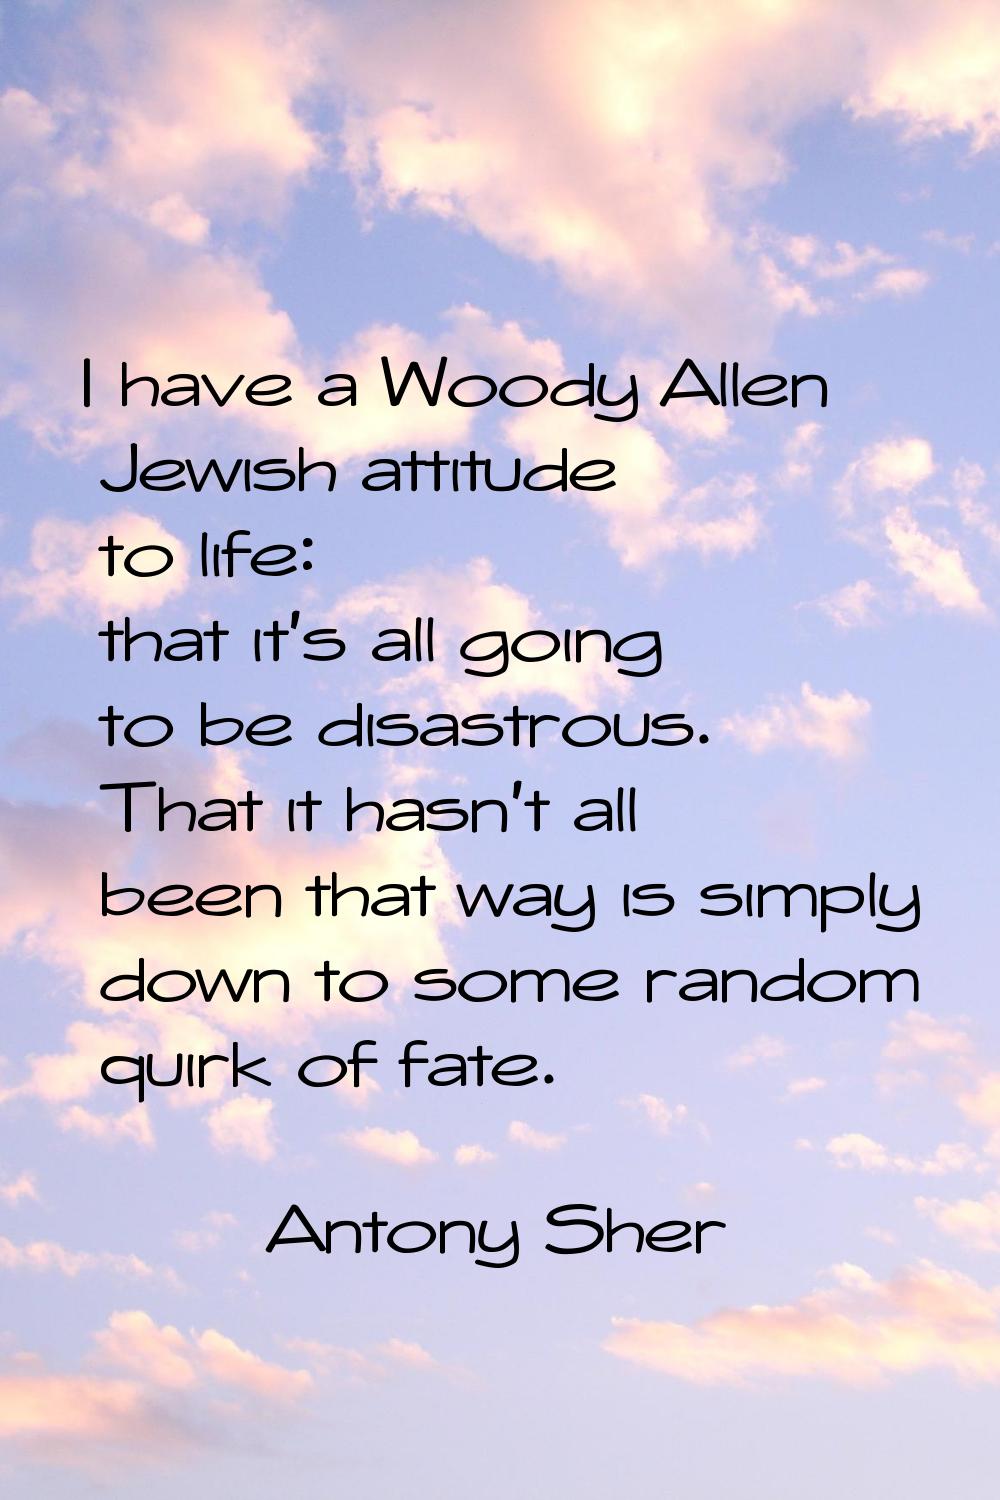 I have a Woody Allen Jewish attitude to life: that it's all going to be disastrous. That it hasn't 